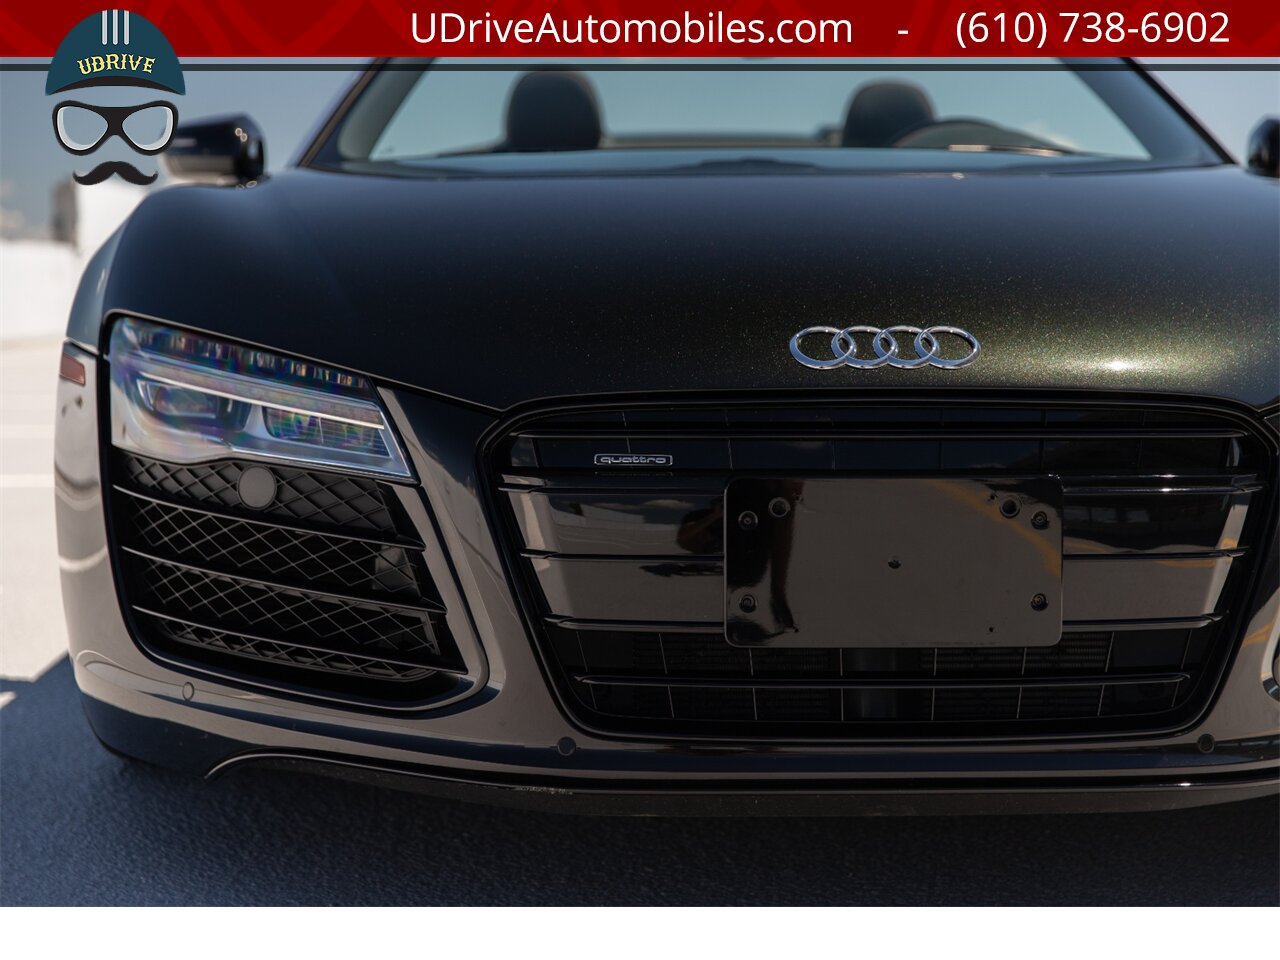 2014 Audi R8 5.2 V10 Quattro Spyder 6 Speed Manual 2k Miles  Extremely RARE 1 of 1 Color Combo - Photo 13 - West Chester, PA 19382